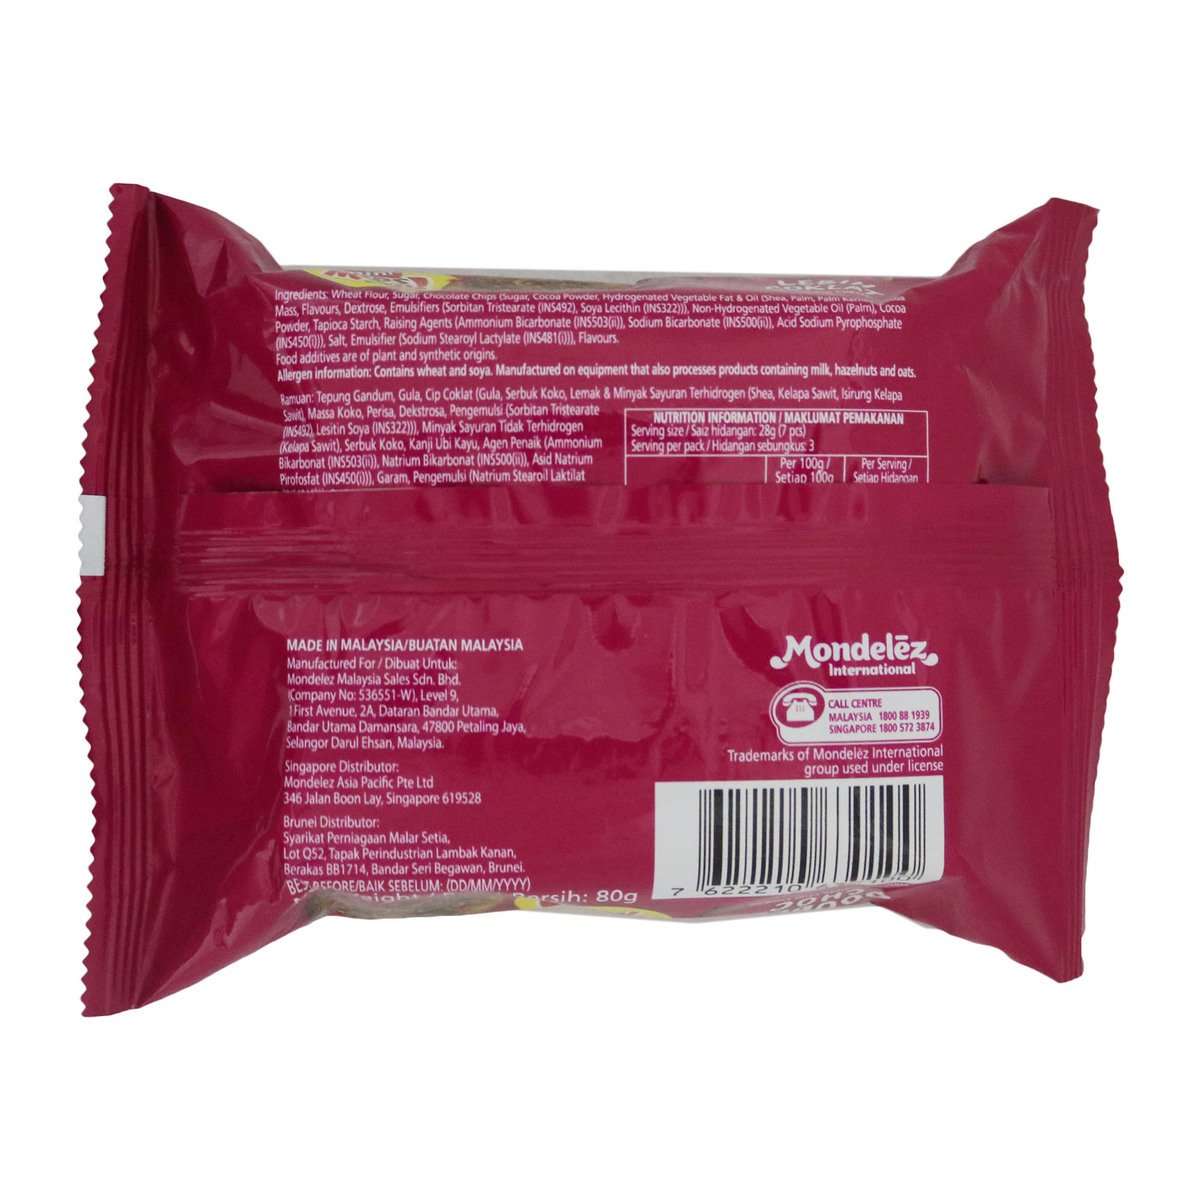 Chipsmore Double Chocolate Mini Biscuits 80g